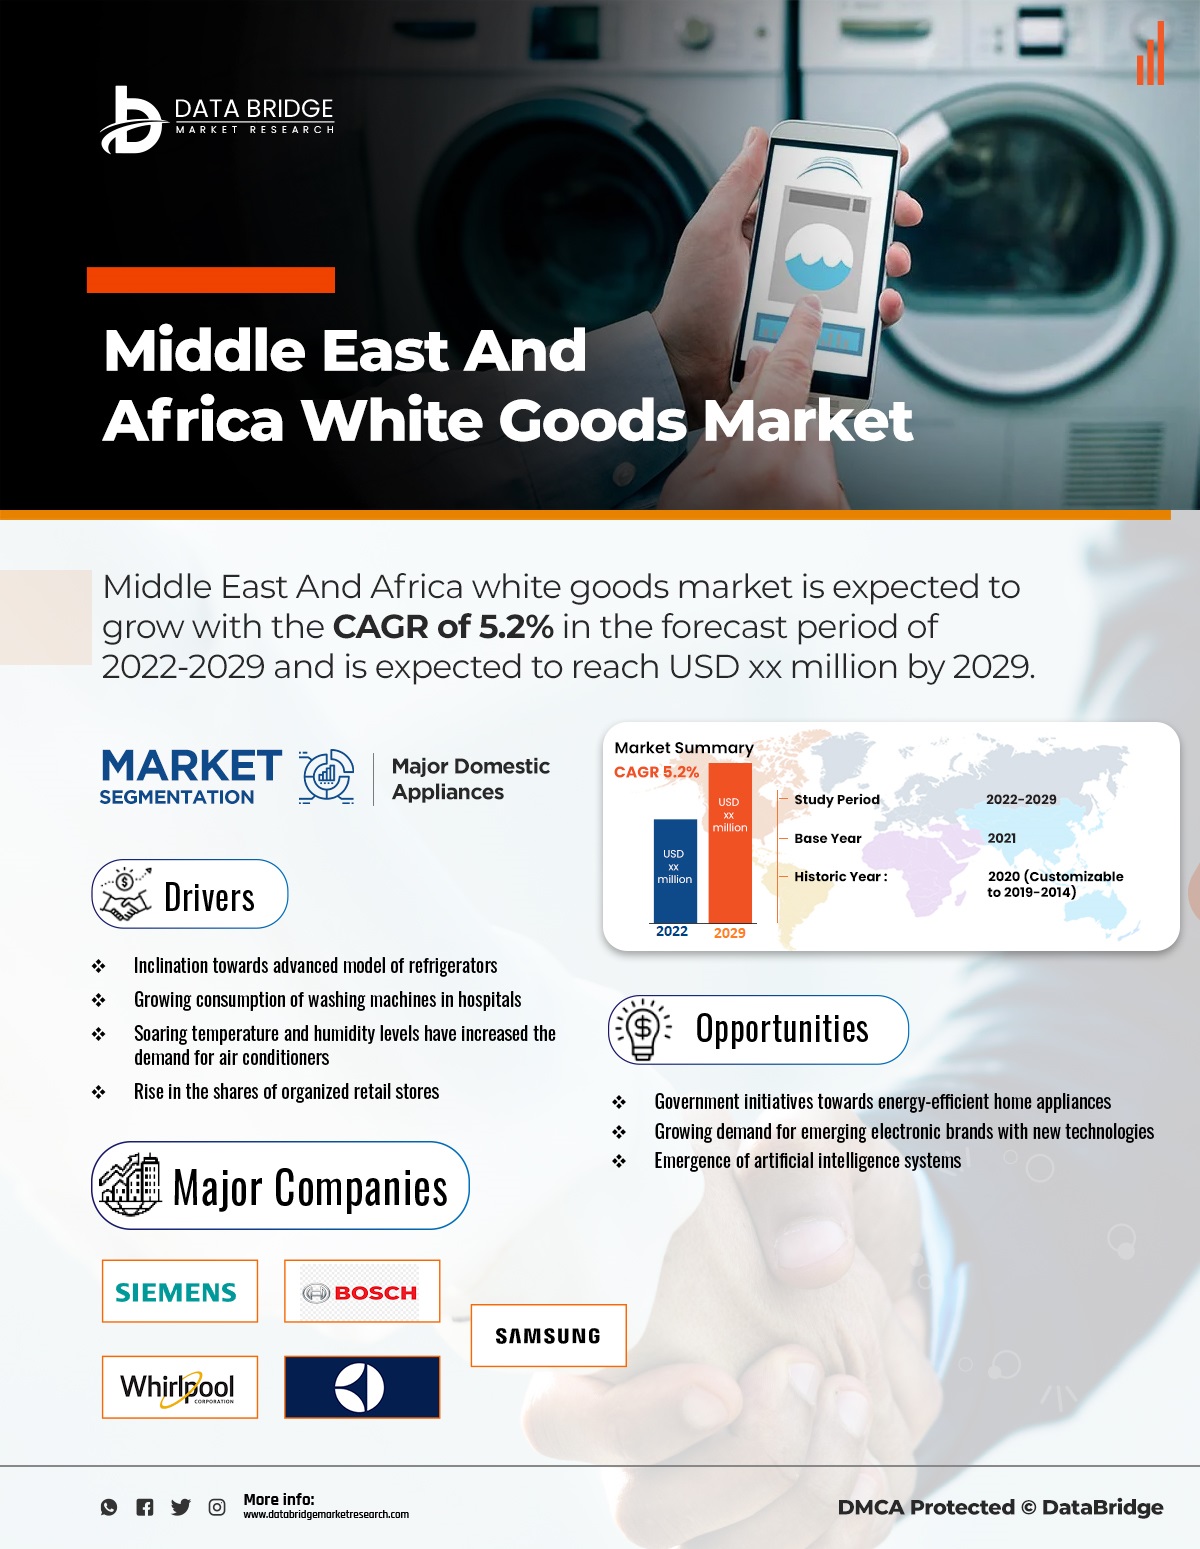 Middle East and Africa White Goods Market